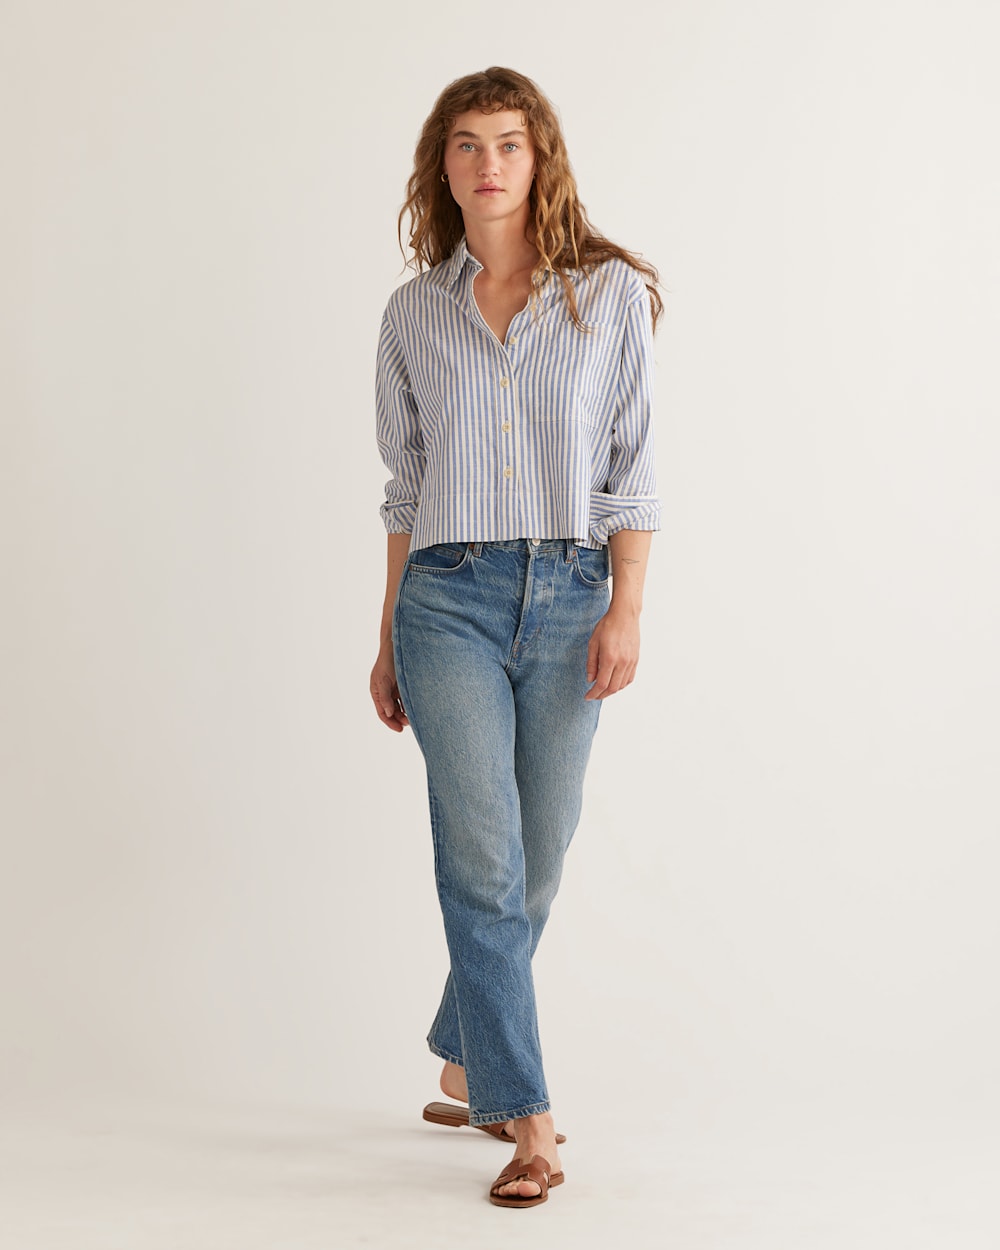 WOMEN'S BRENTWOOD OVERSIZED SHIRT IN BLUE/IVORY STRIPE image number 1